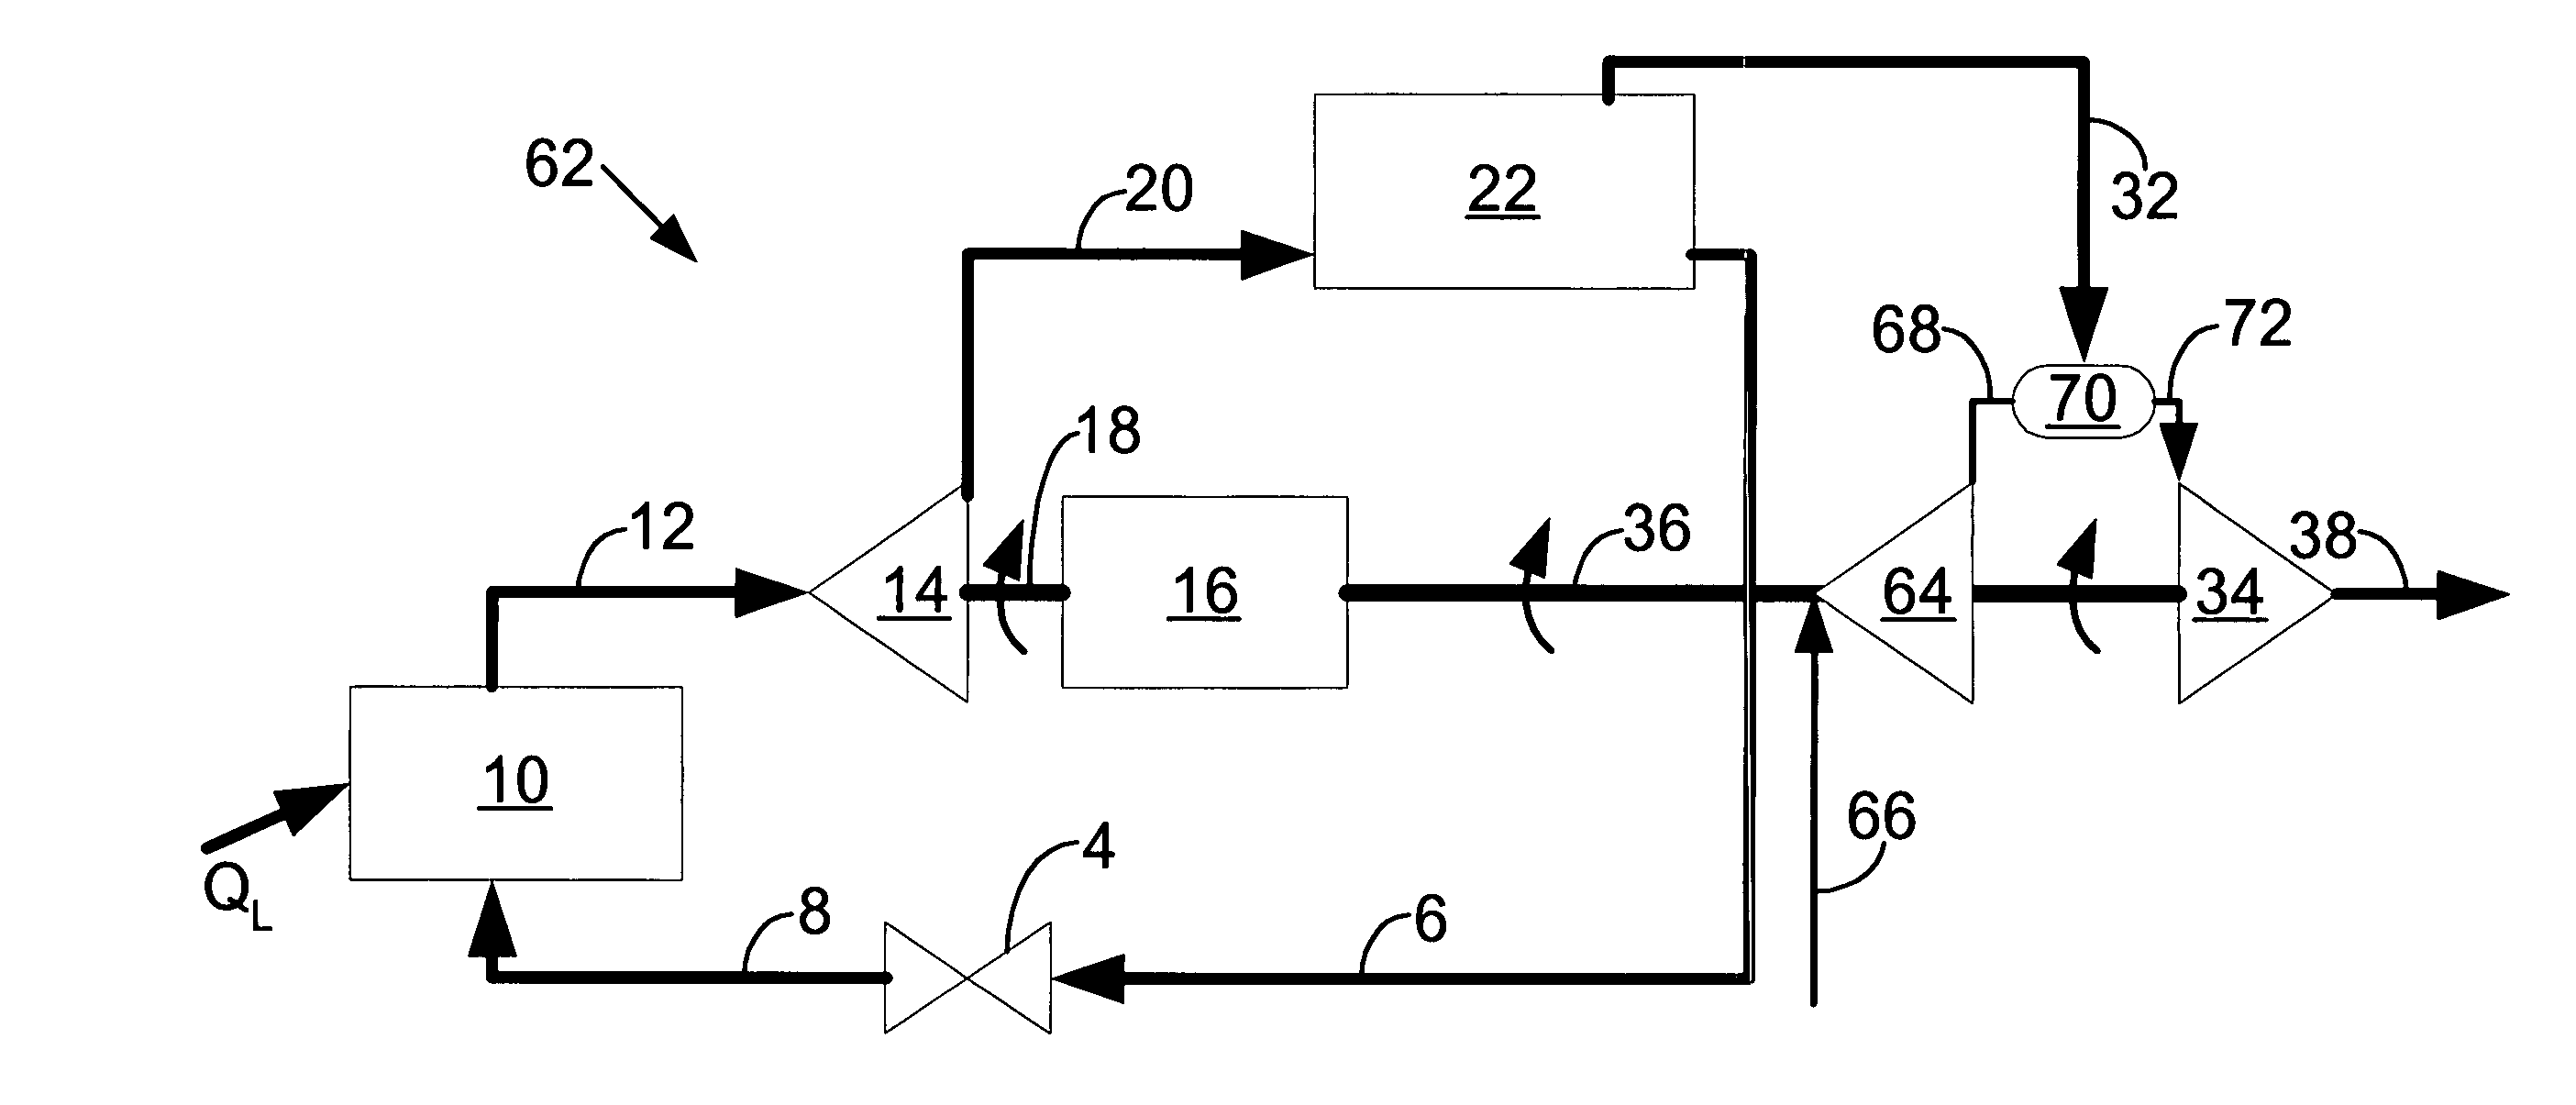 Expendable turbine driven compression cycle cooling system